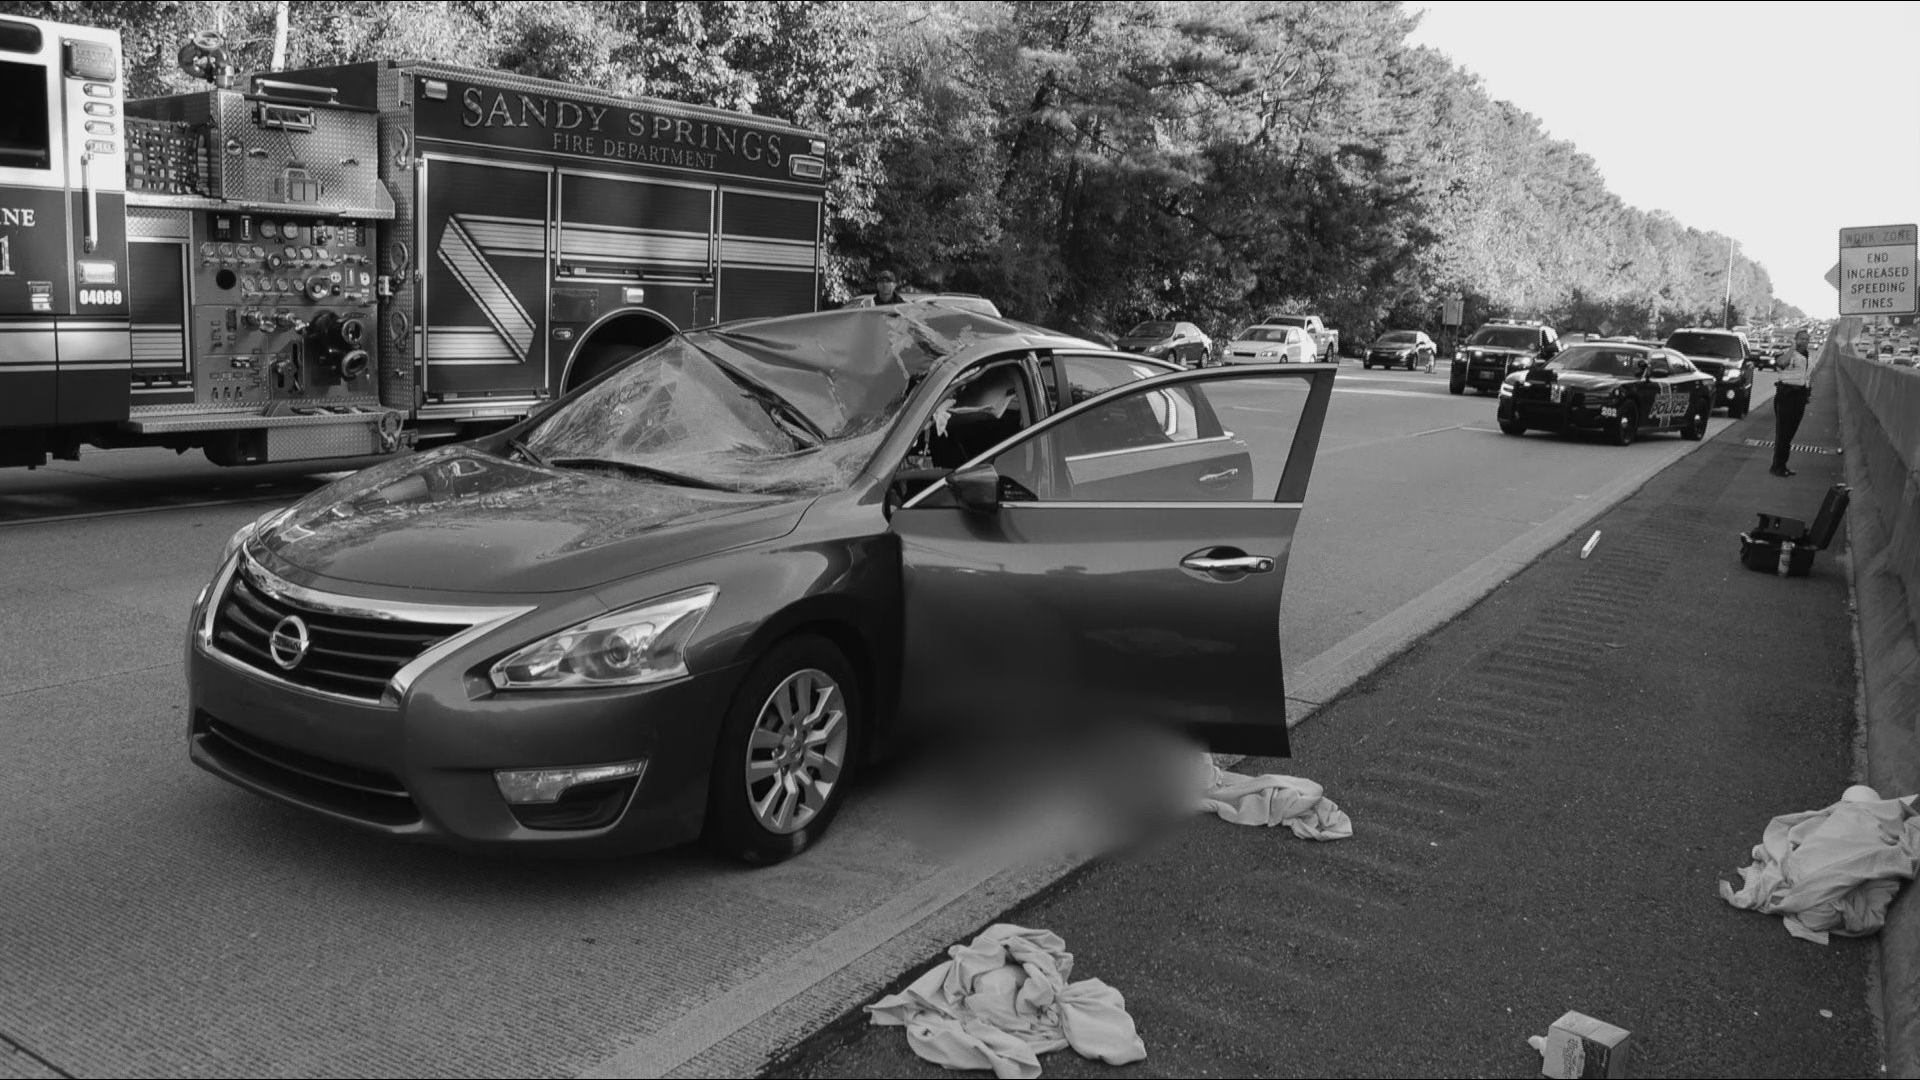 The mother of two was driving to work when a "freak accident" happened. The Reveal investigates why these easily preventable tragedies happen more than you'd think.